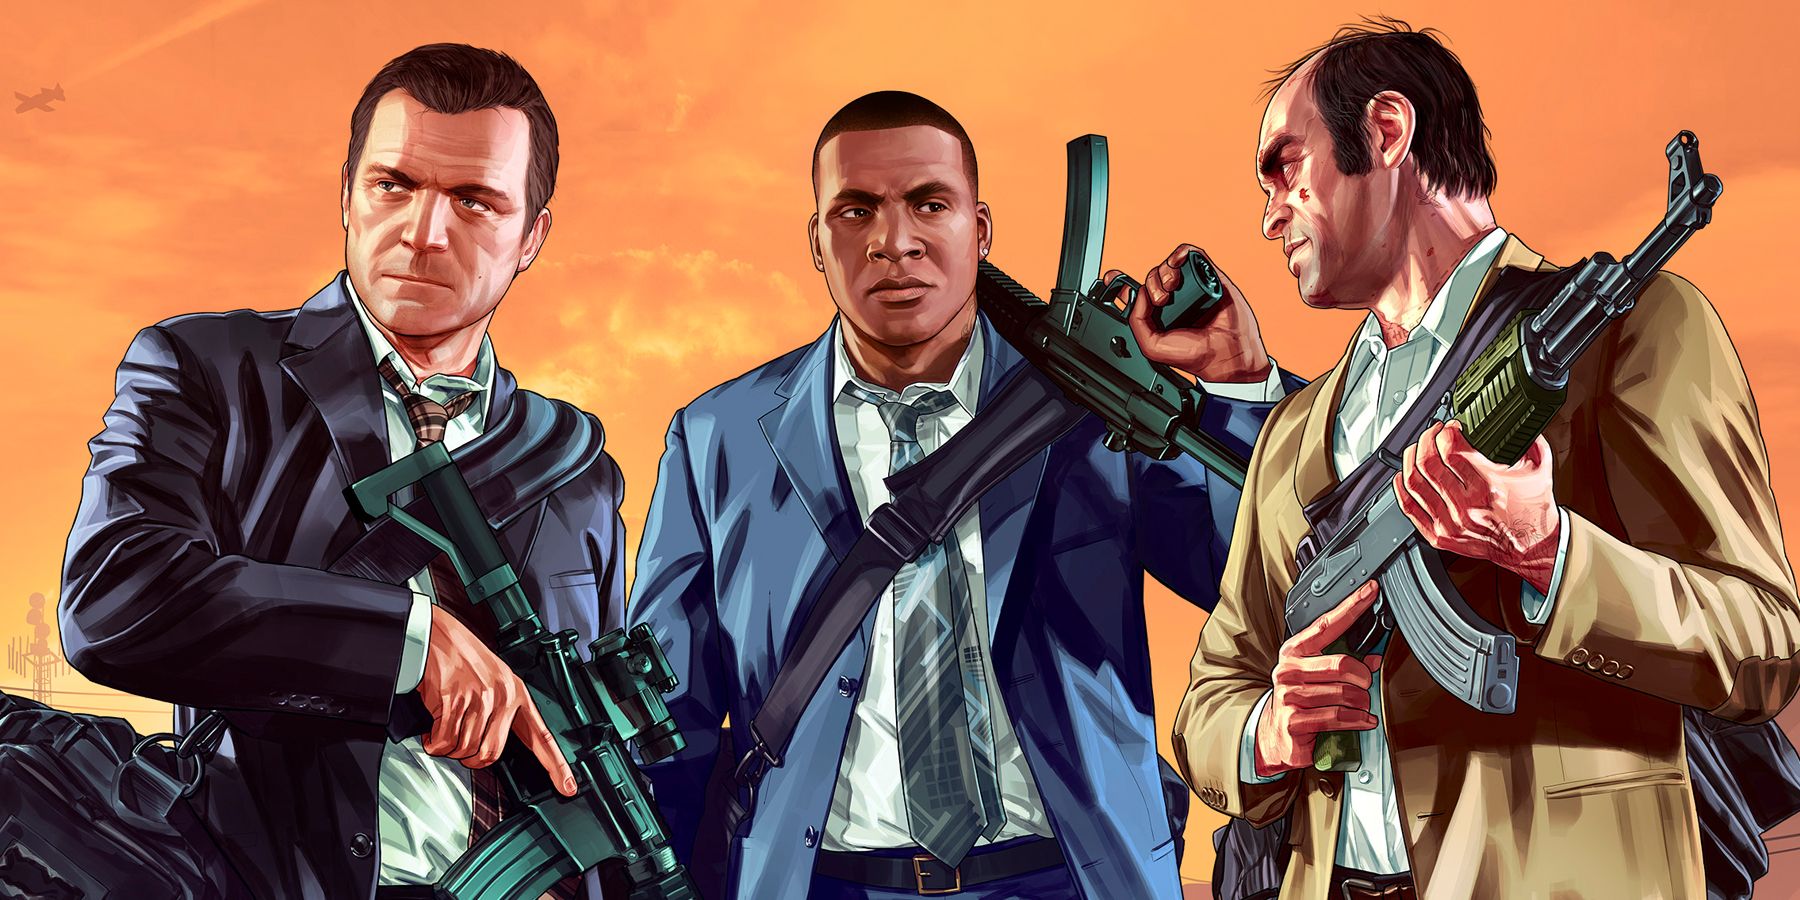 Rockstar Games on X: Celebrate 10 years of Grand Theft Auto V in GTA  Online this week with a trio of outfits inspired by Michael, Franklin, and  Trevor. Plus, get bonuses on